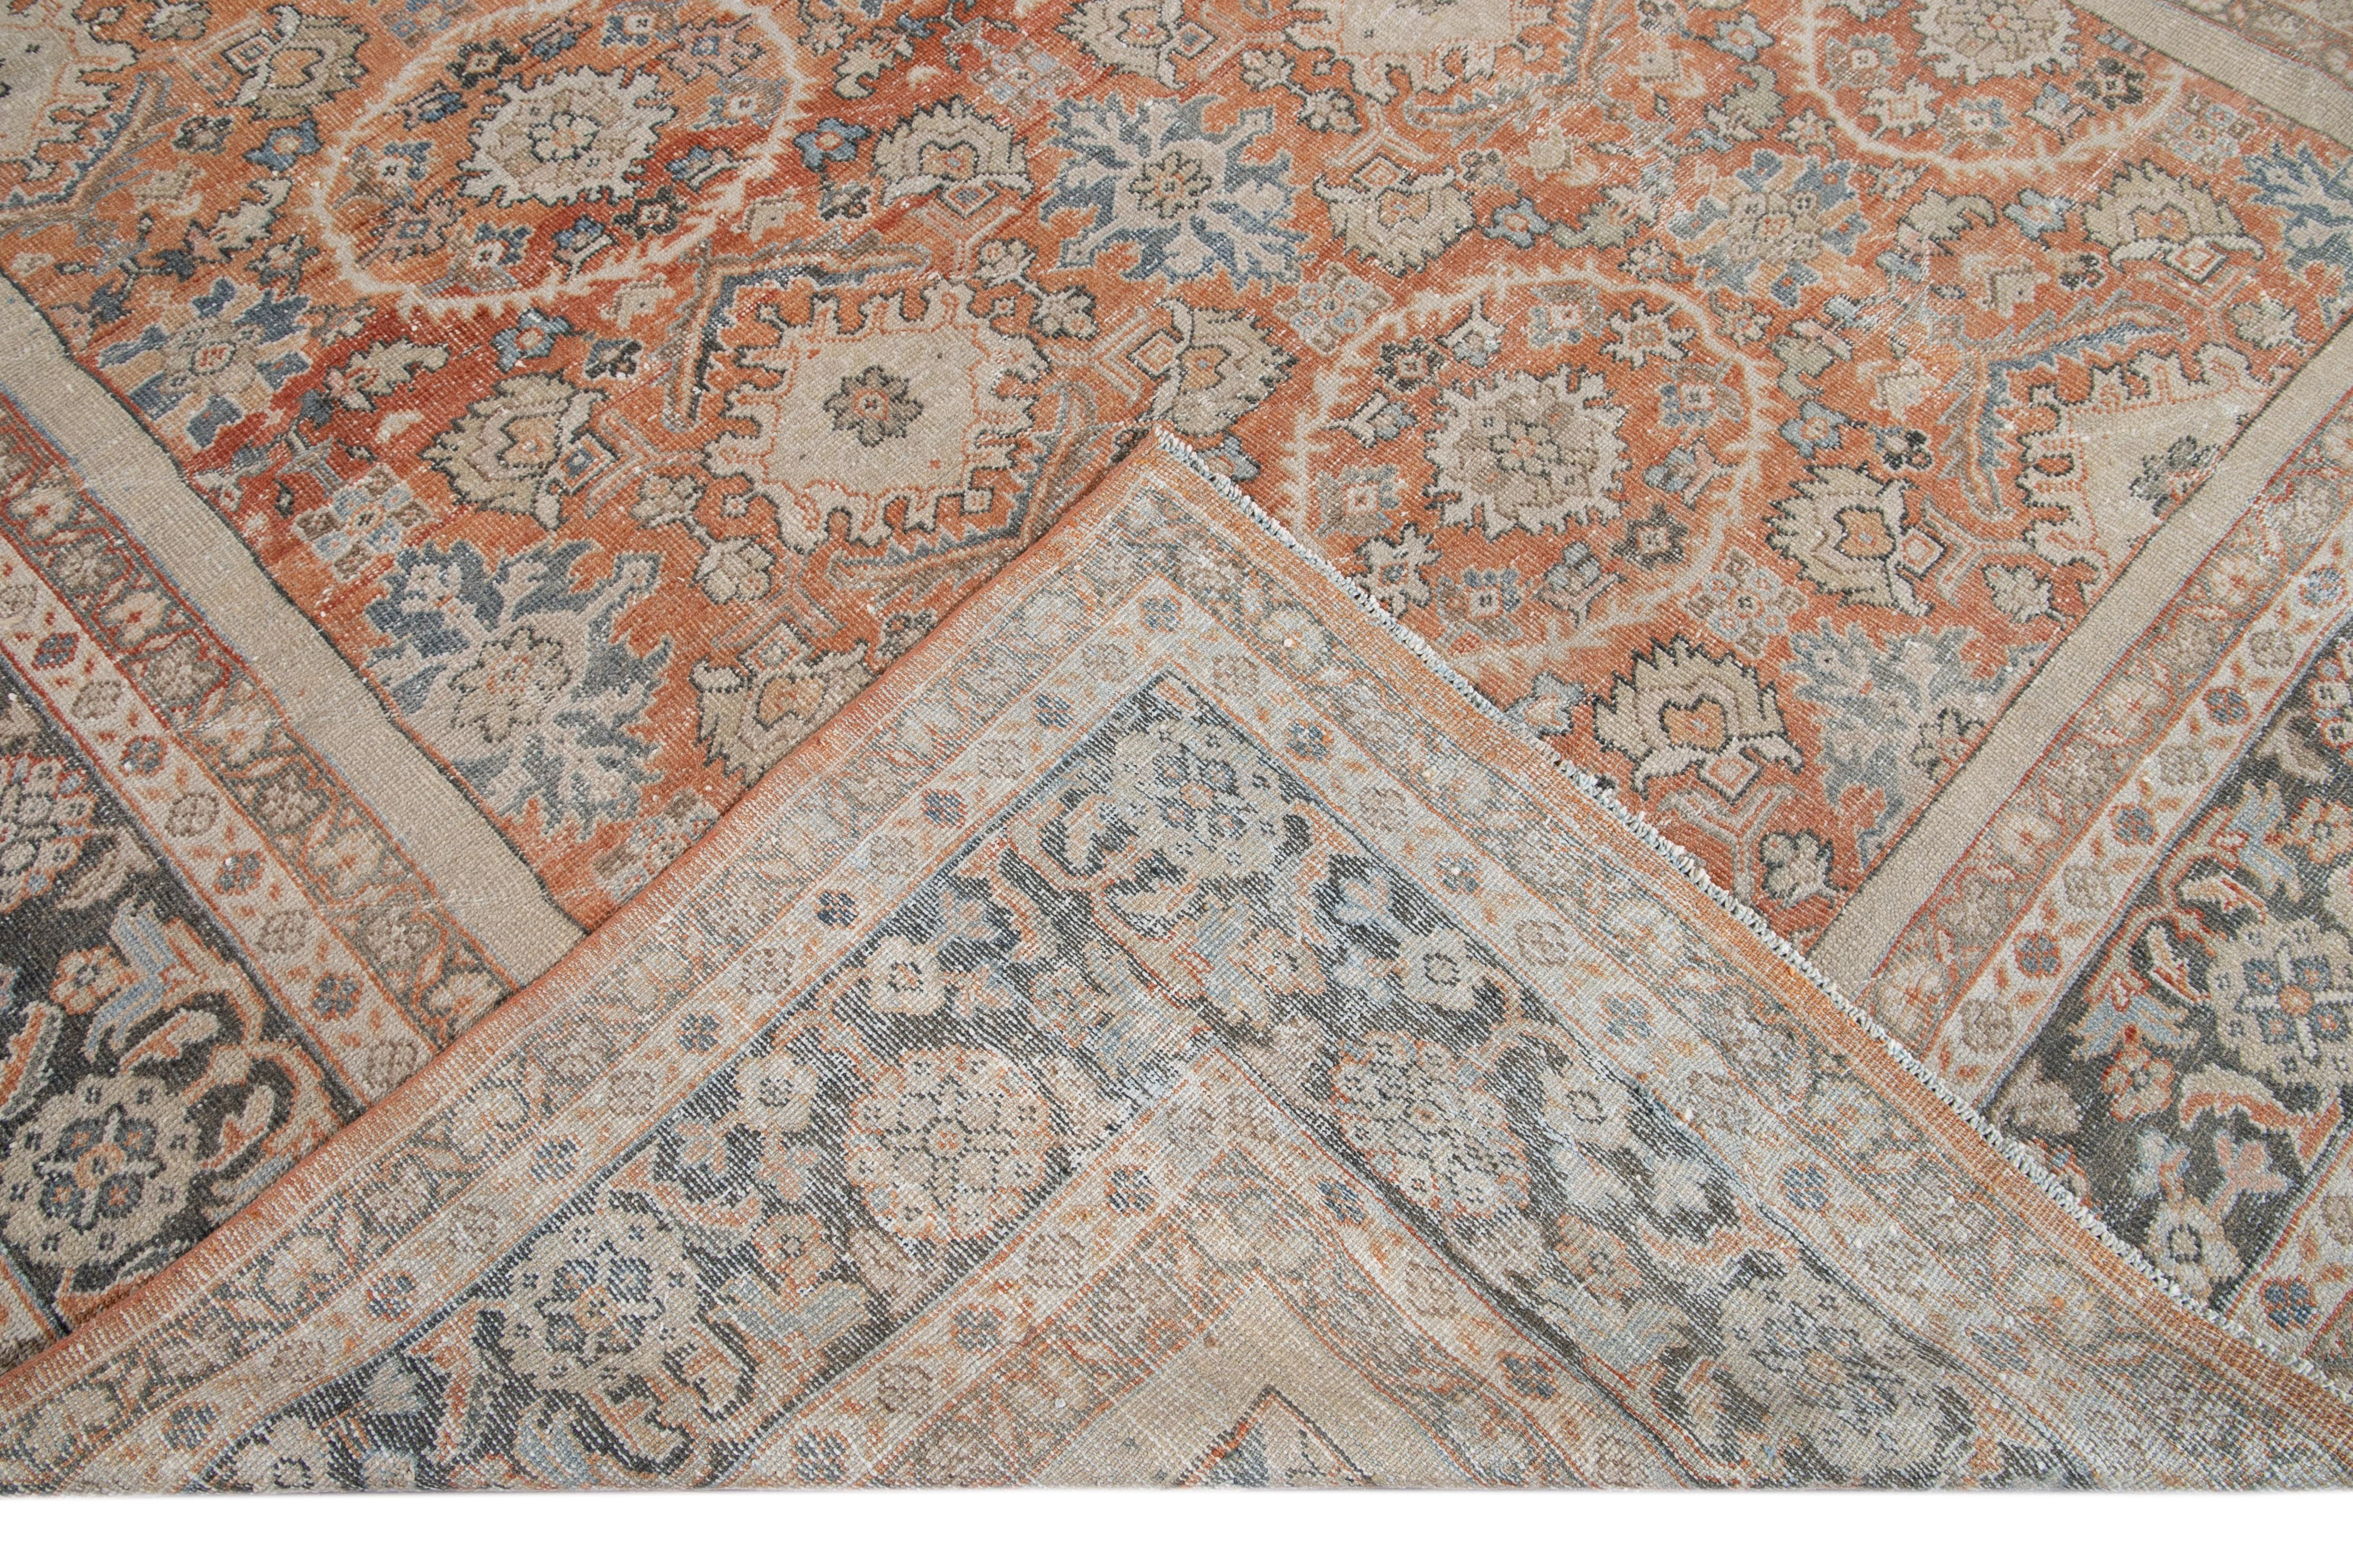 Beautiful antique Mahal hand knotted wool rug with a rust field. This rug has a blue frame and multi-color accents in a gorgeous all-over distressed shabby chic floral design.

This rug measures: 9'6